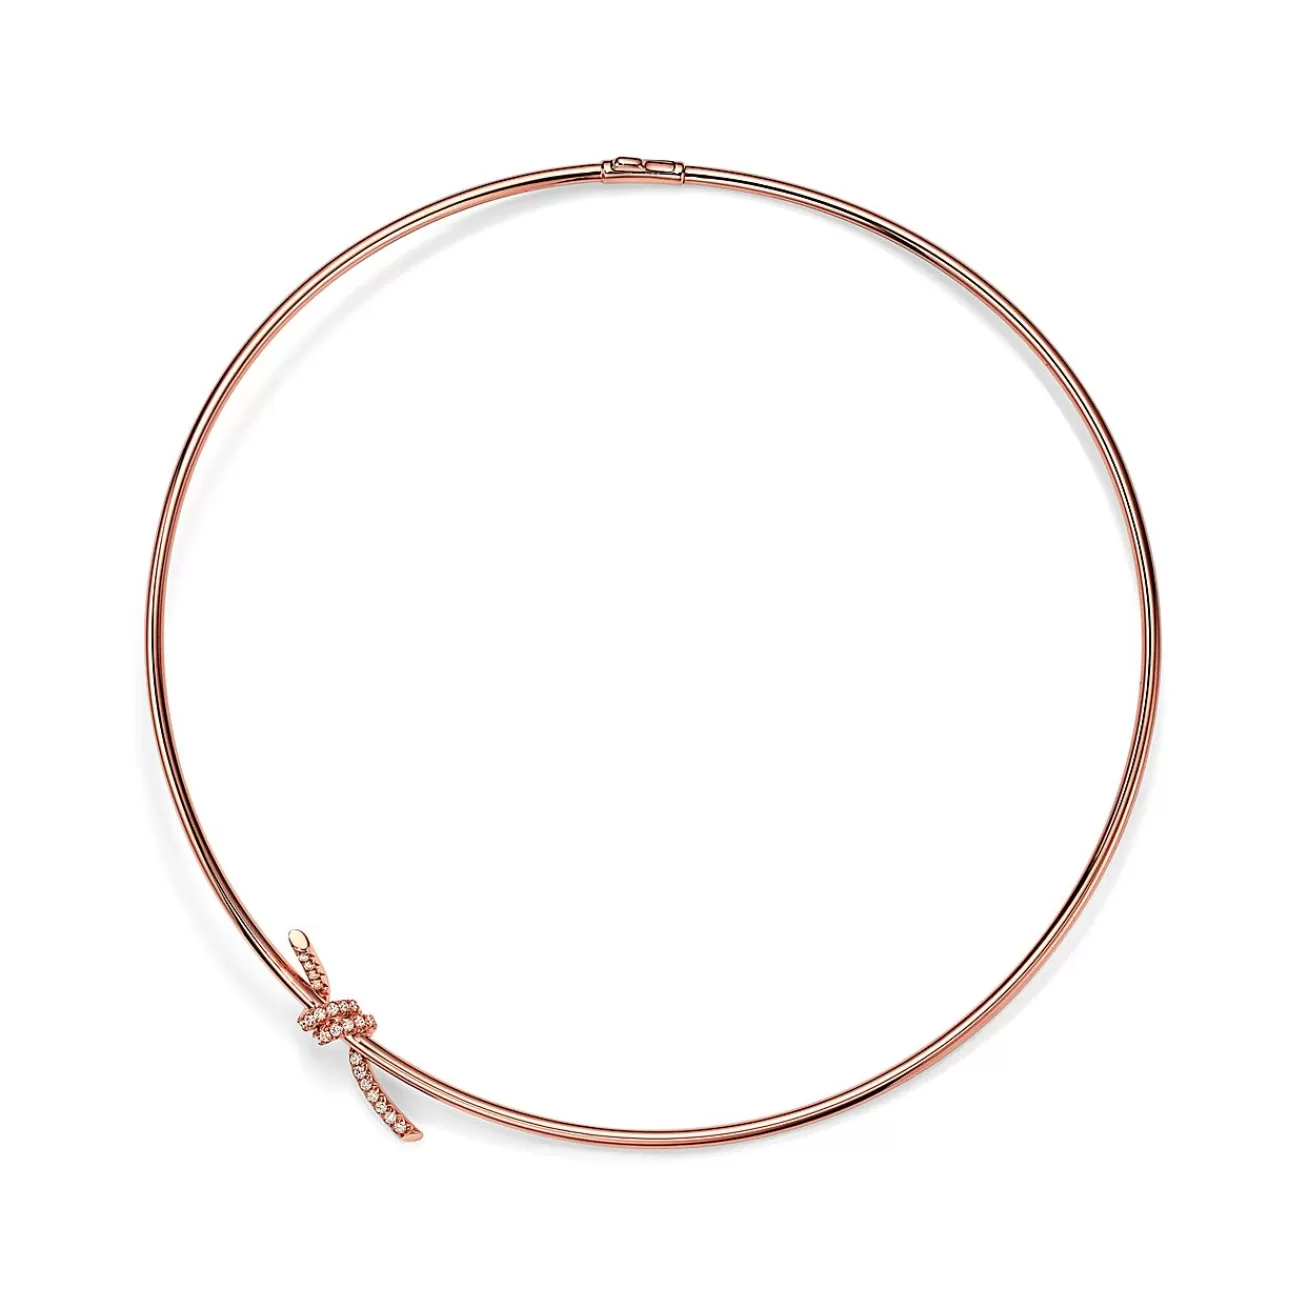 Tiffany & Co. Tiffany Knot Necklace in Rose Gold with Diamonds | ^ Necklaces & Pendants | Rose Gold Jewelry